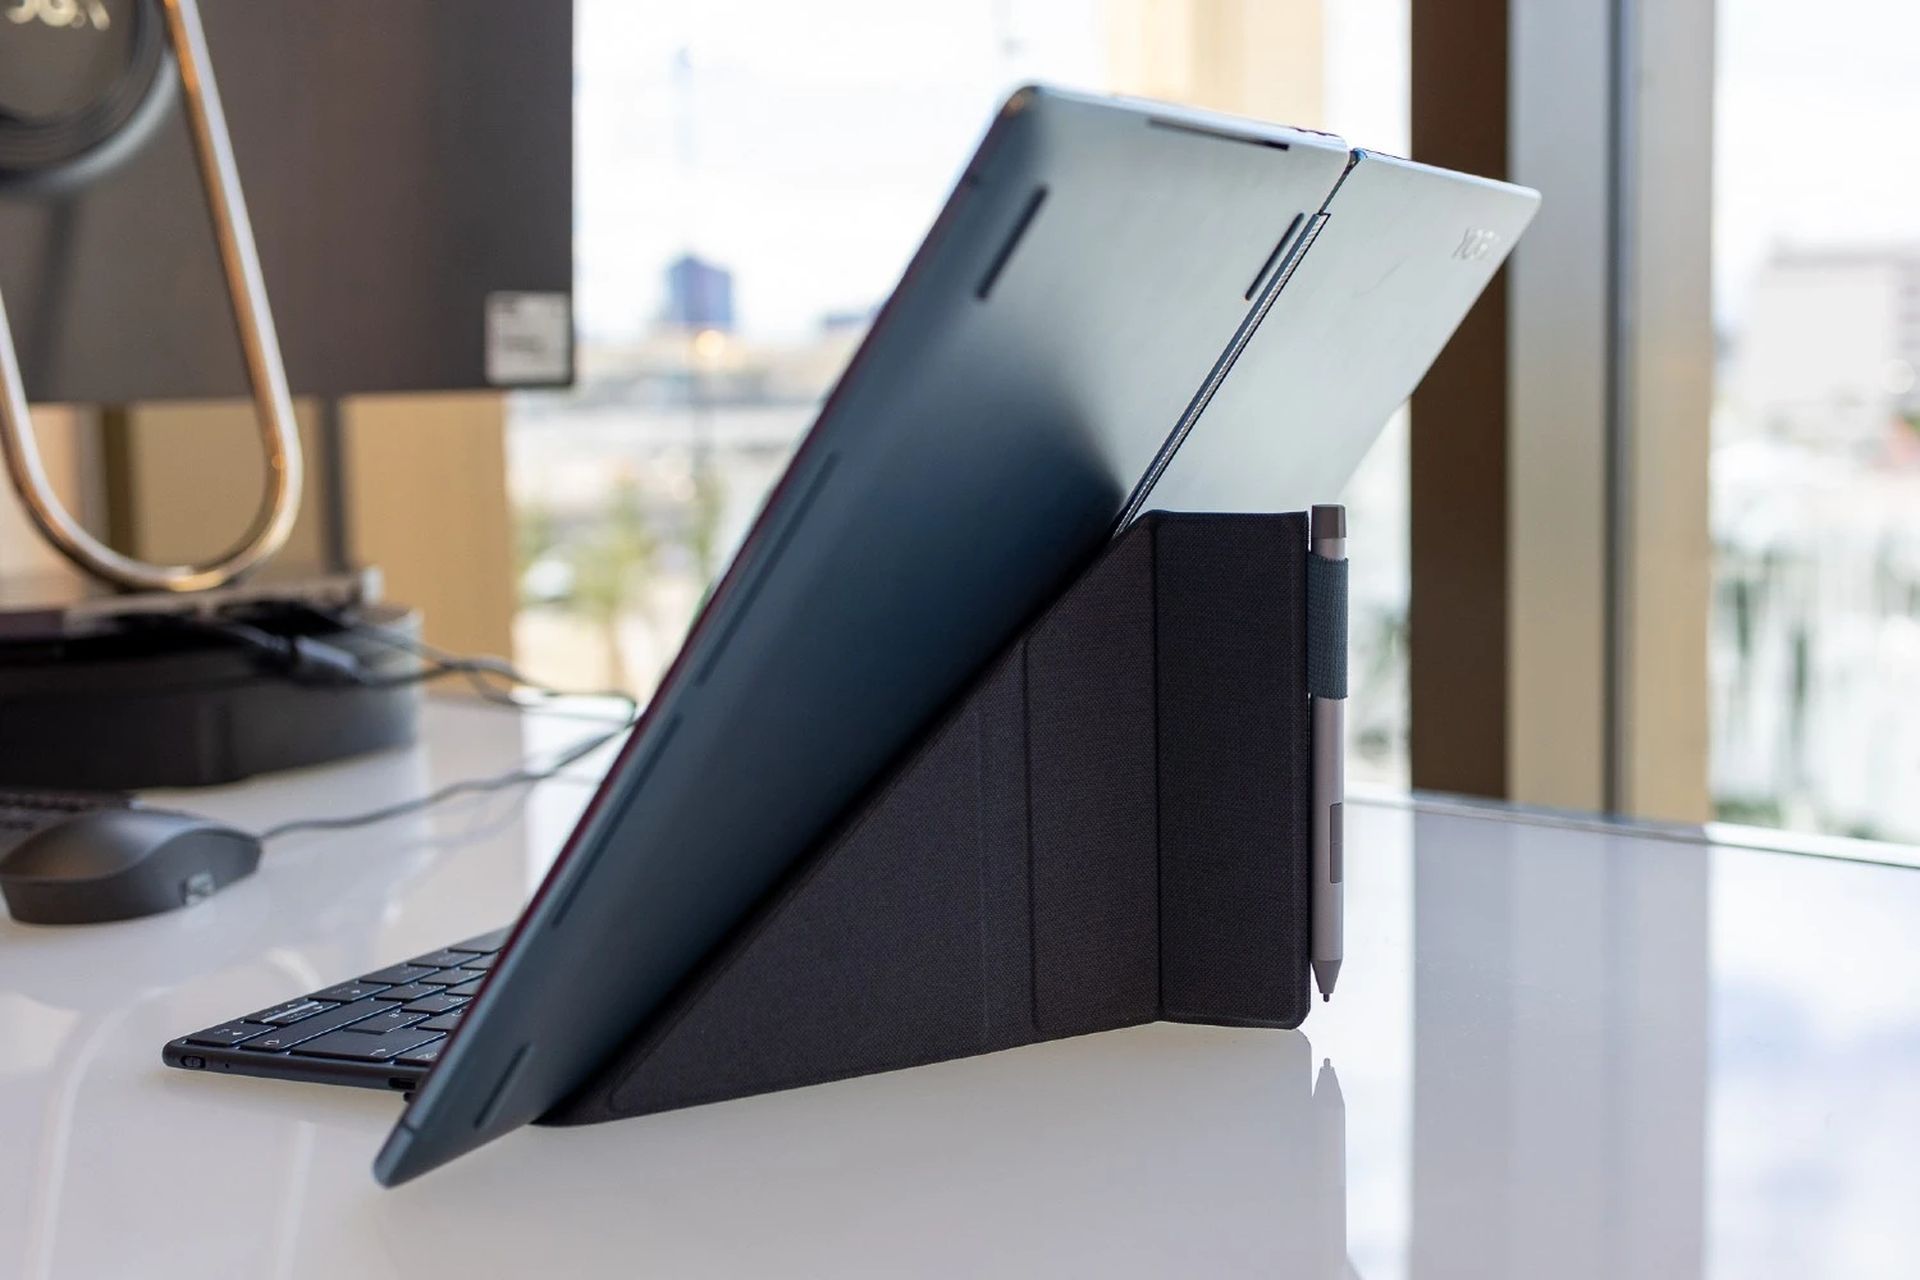 Lenovo Yoga Book 9i: The dual screen laptop you've been waiting for